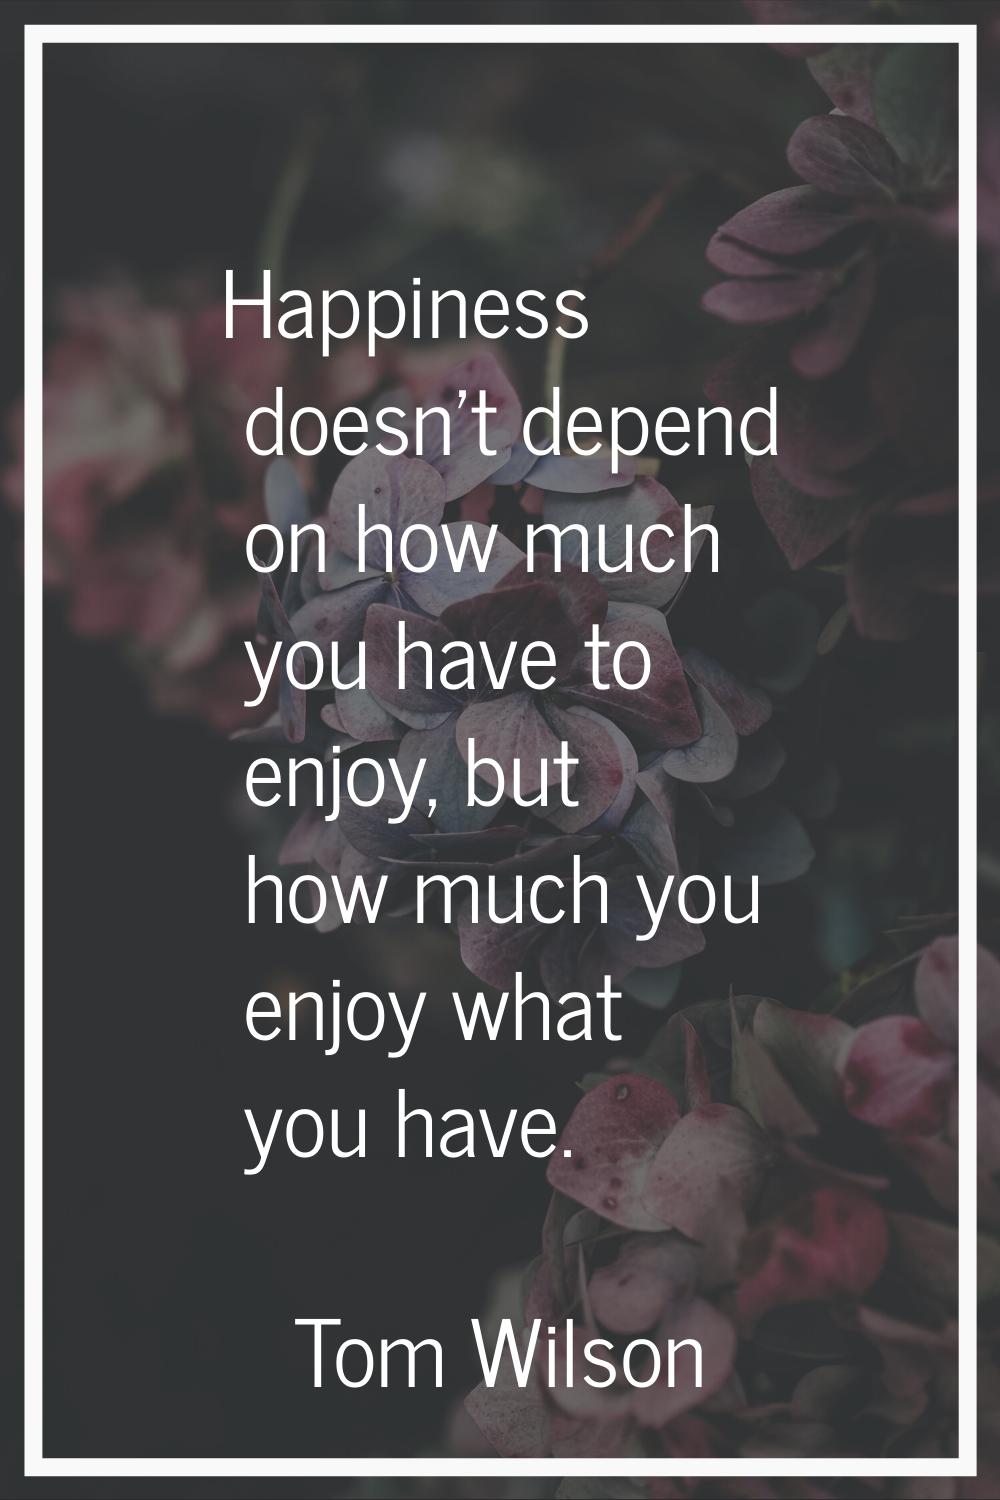 Happiness doesn't depend on how much you have to enjoy, but how much you enjoy what you have.